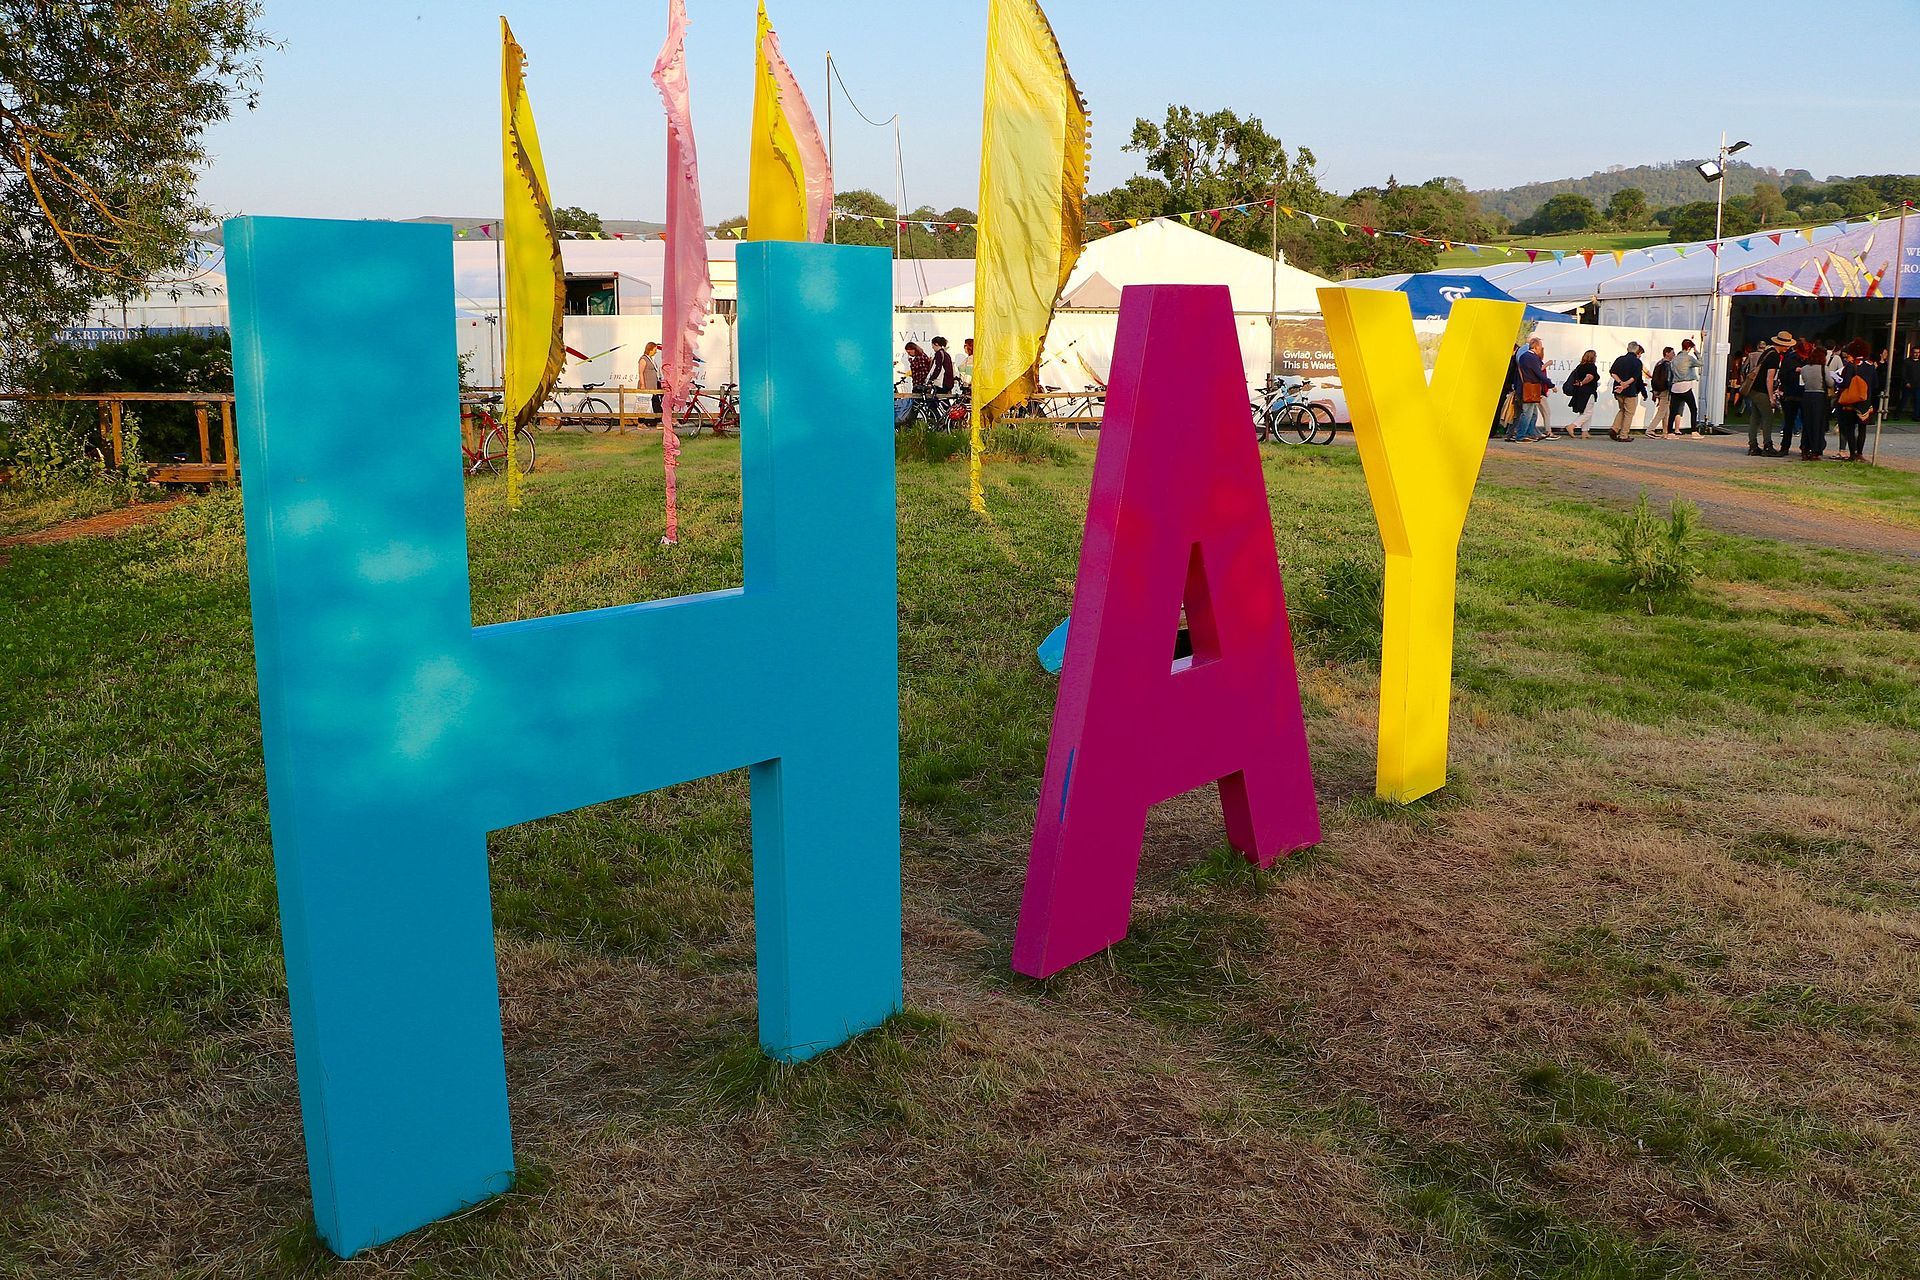 The hay festival